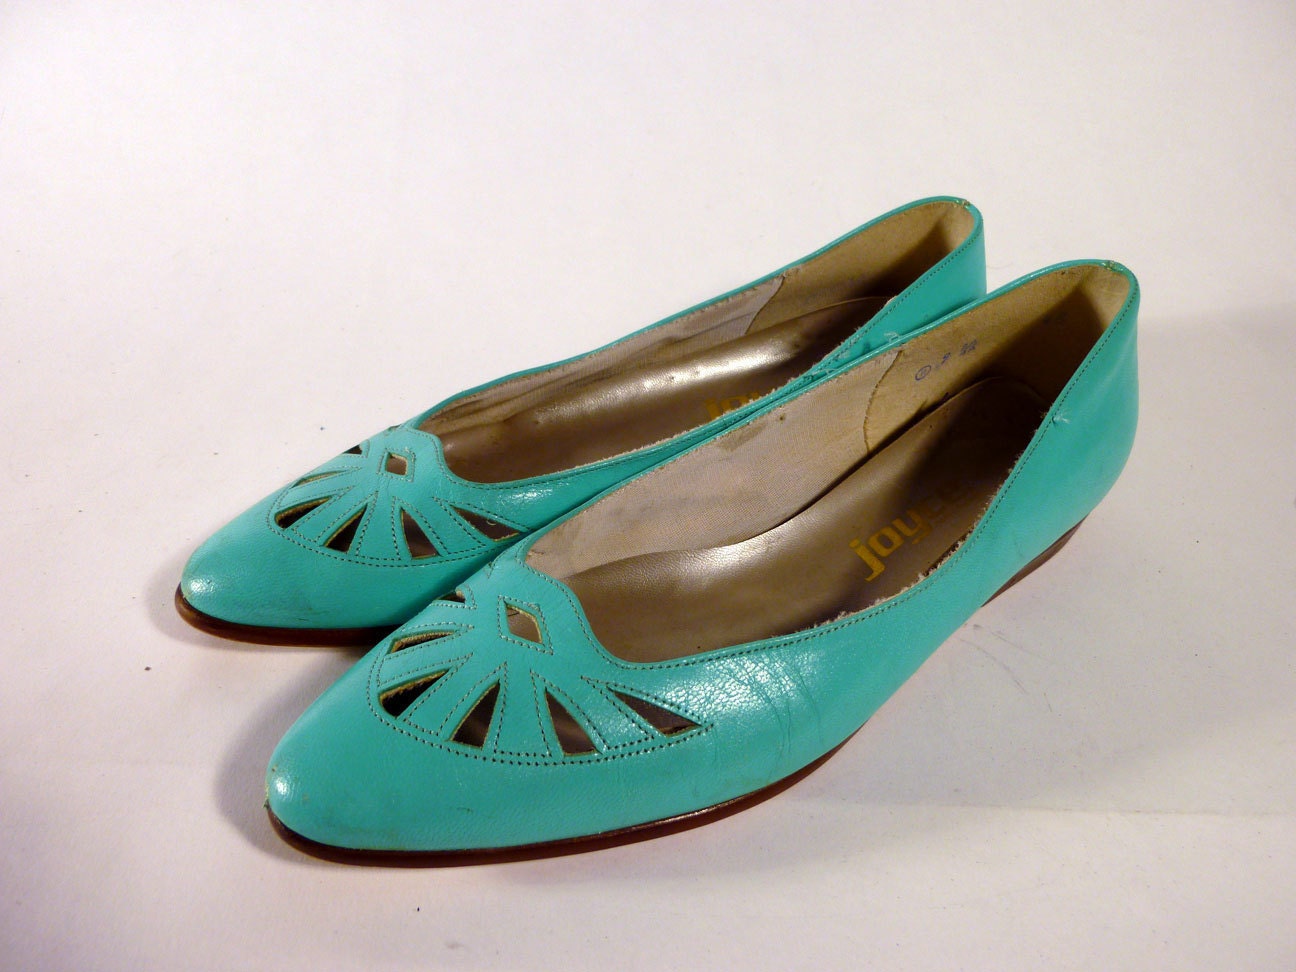 Women's Vintage Leather Teal Flats Shoes by Joyce Size 8.5